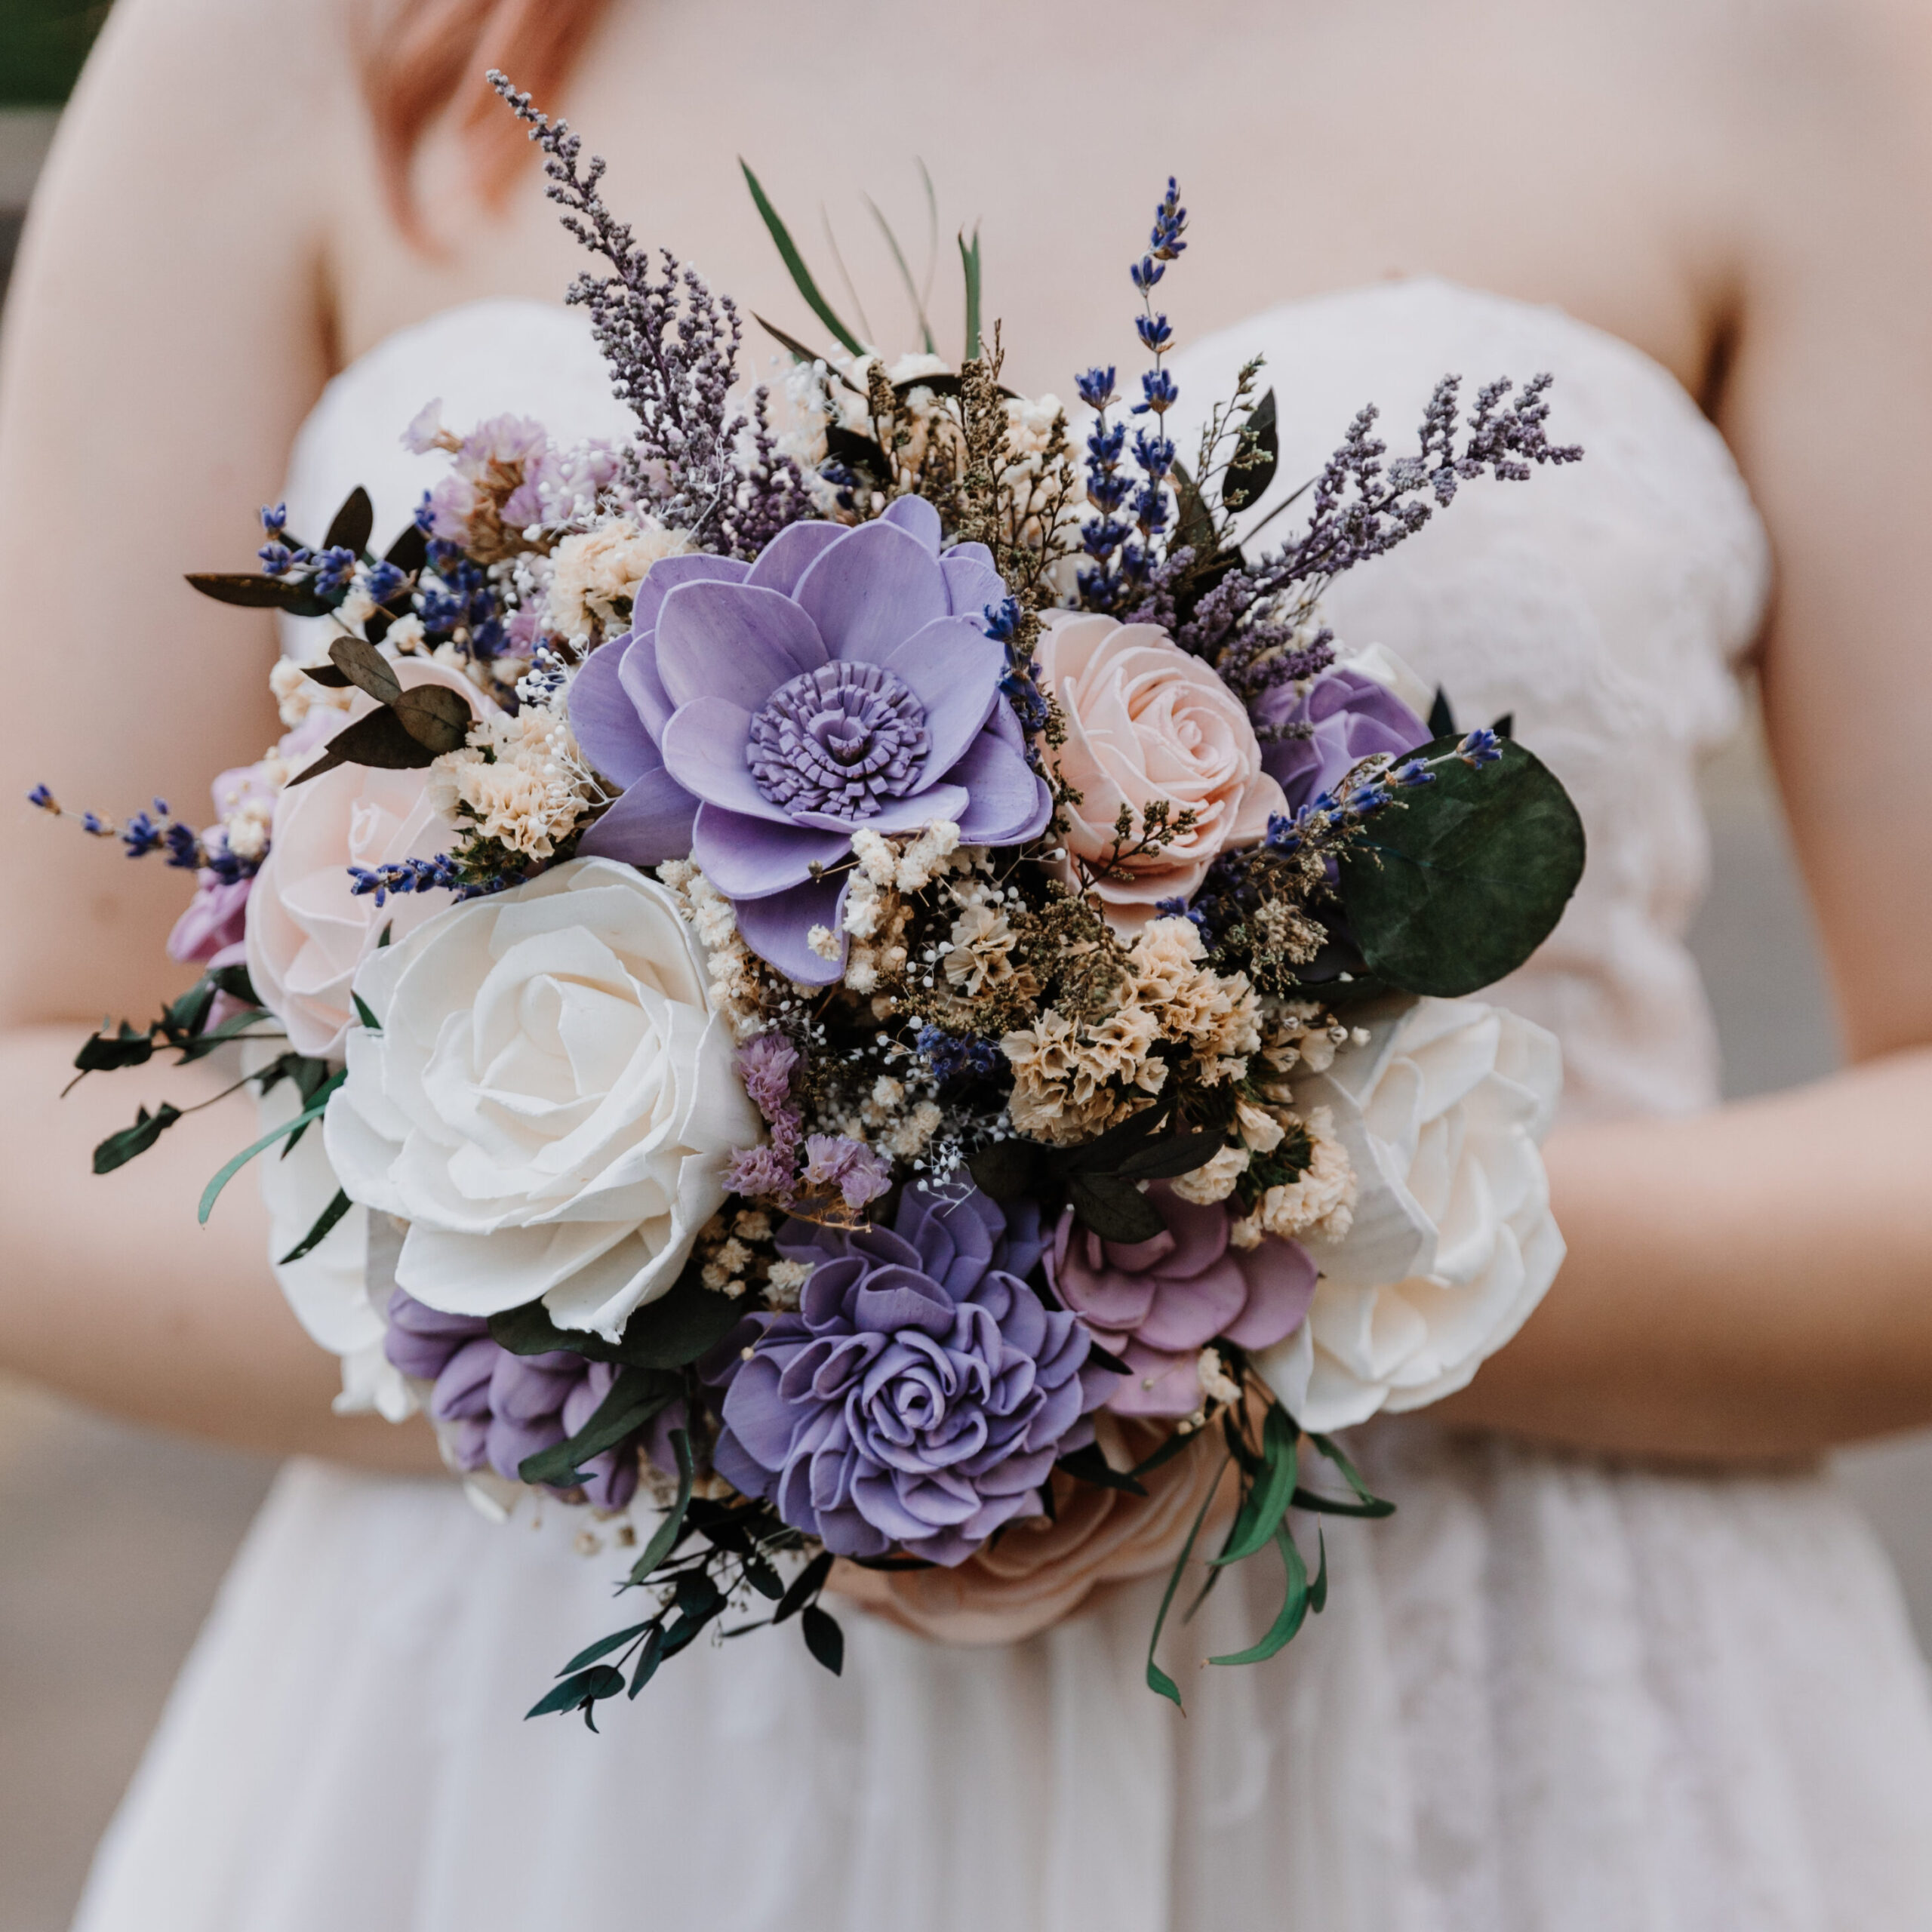 Photograph of a medium sized bridal bouquet featuring a modern and loose style with purple, white, and pink sola flowers